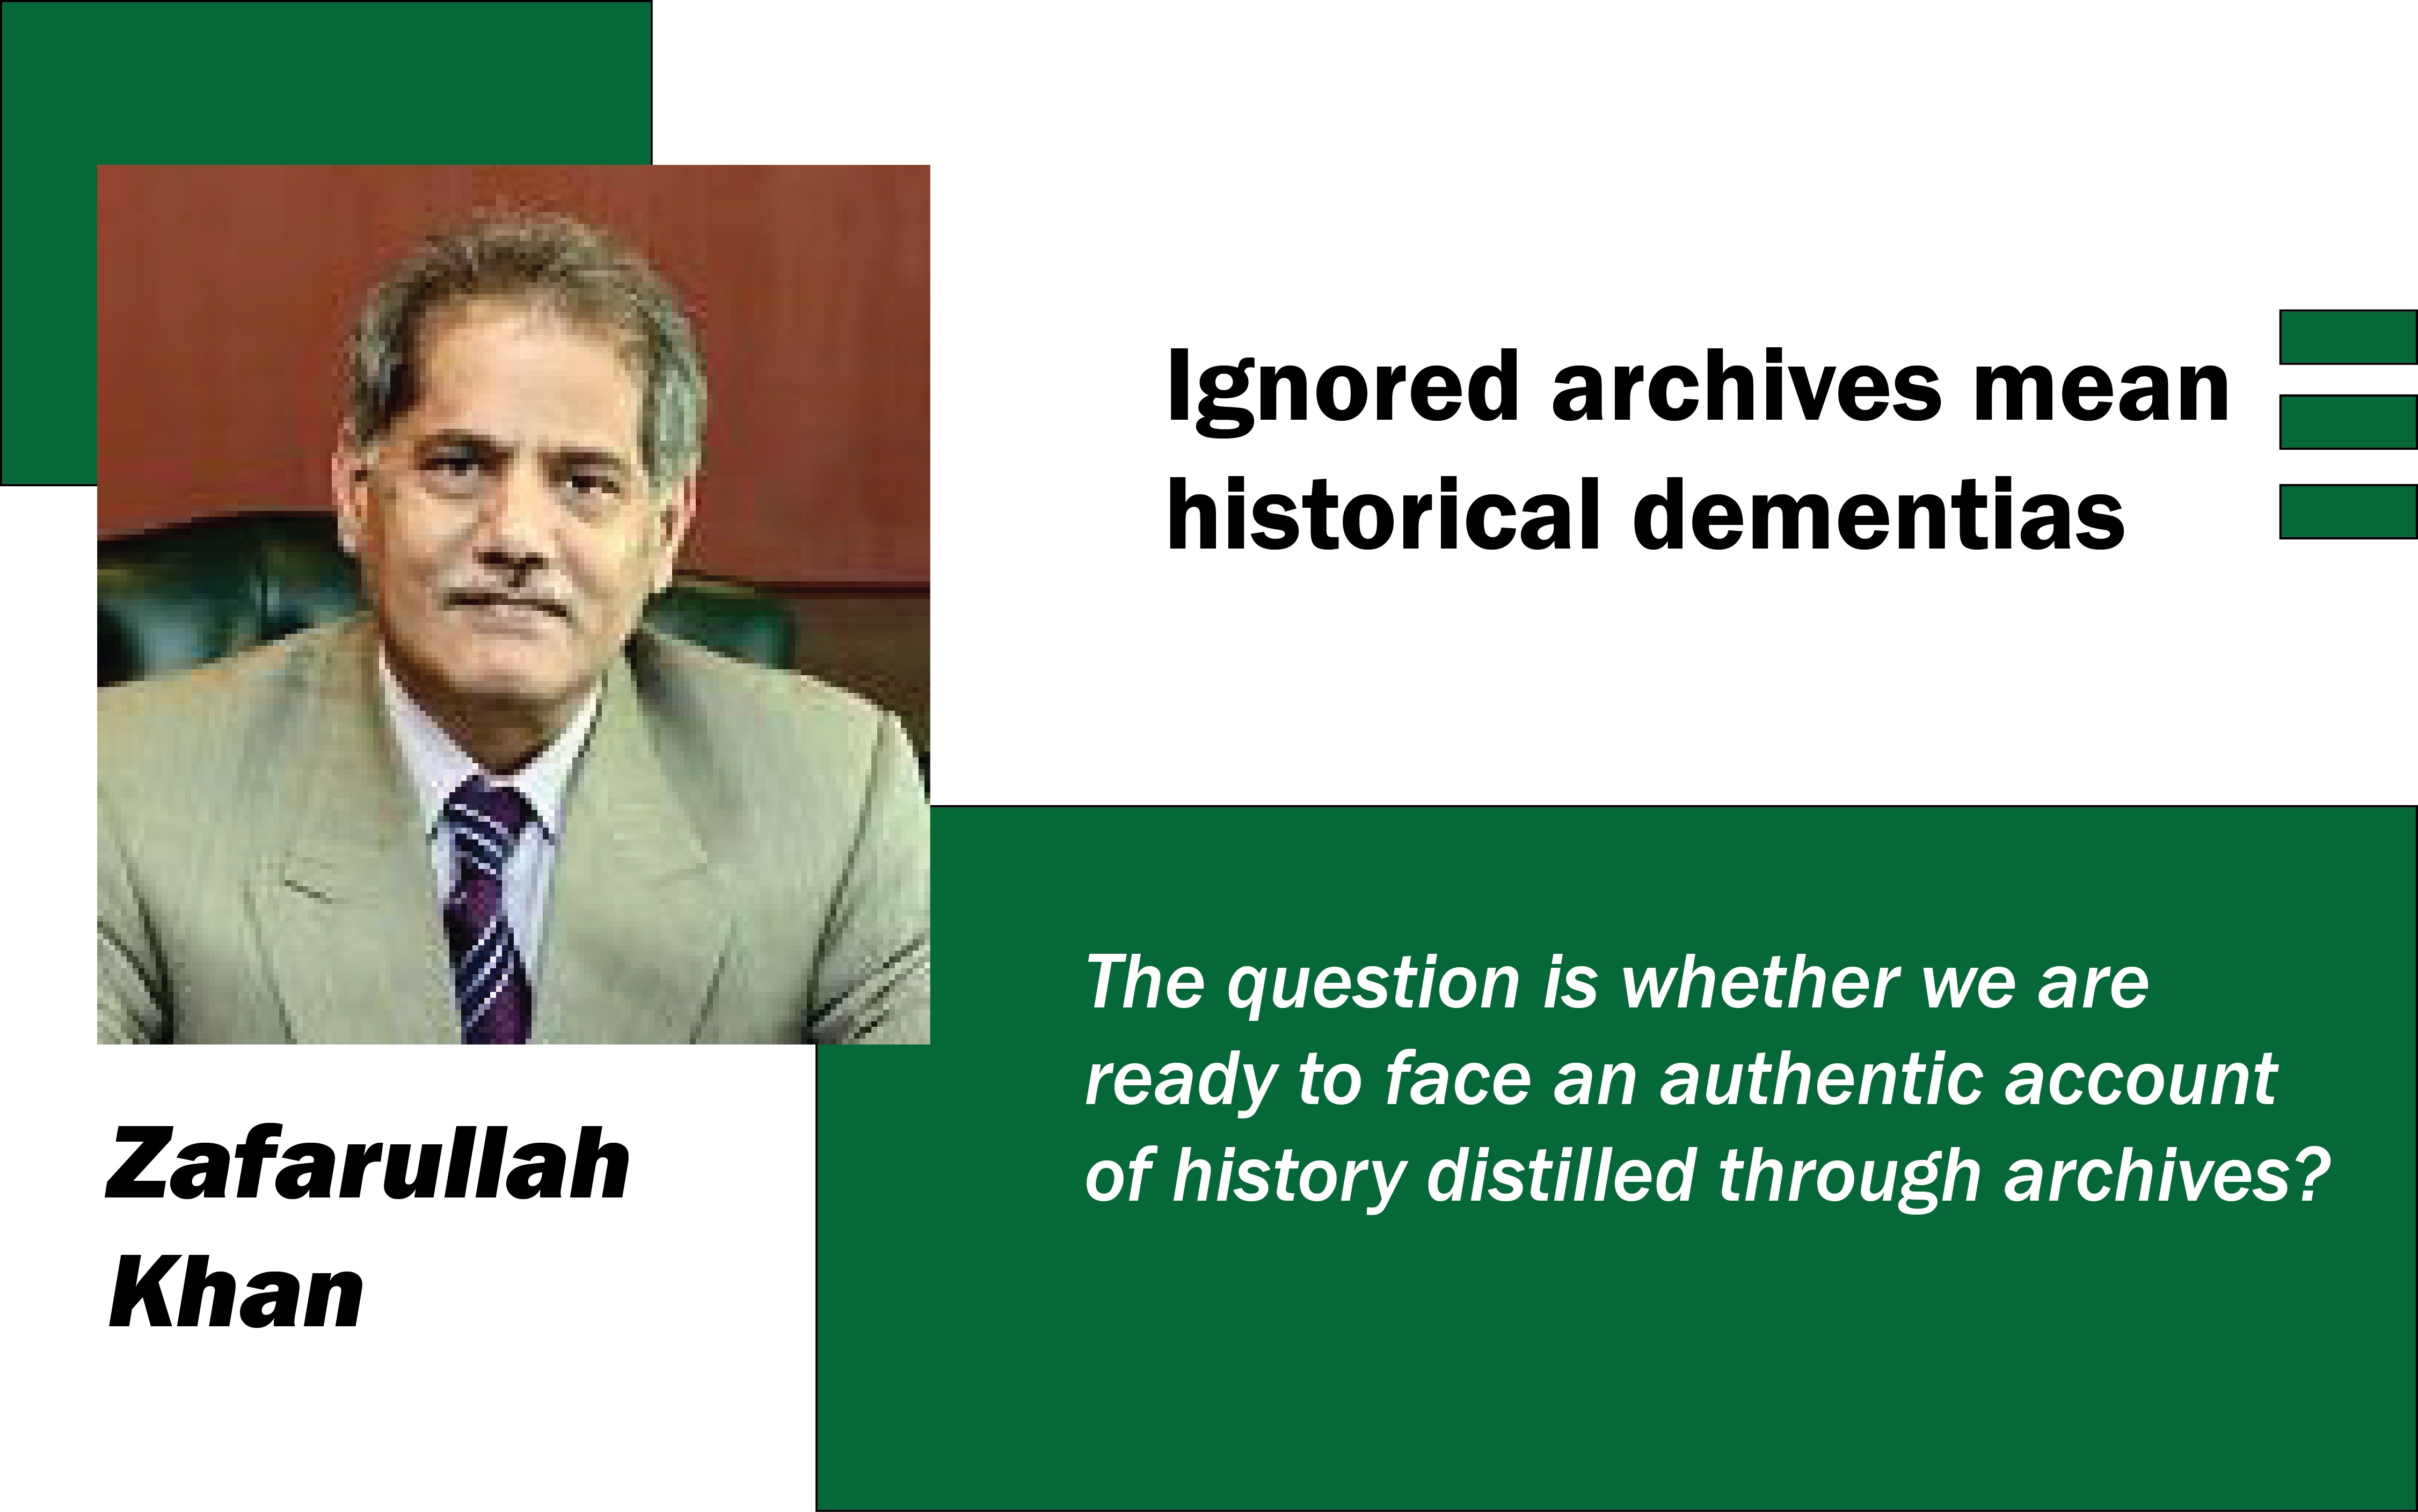 Ignored archives mean historical dementias